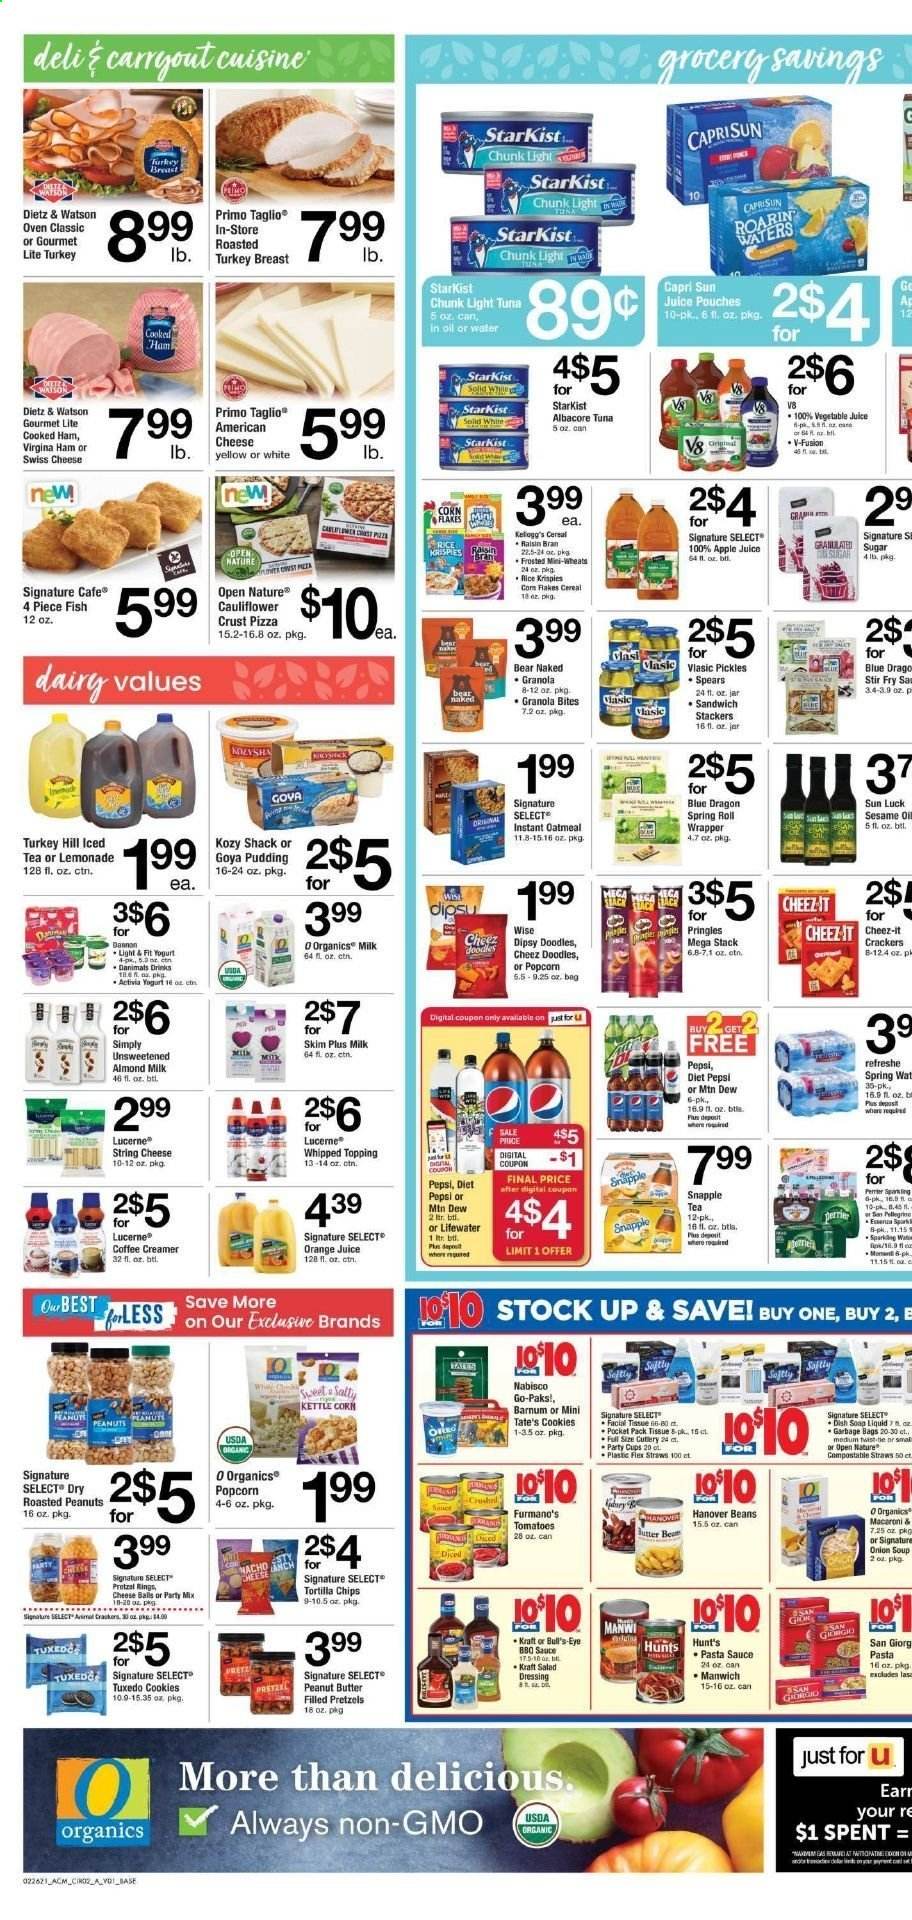 thumbnail - ACME Flyer - 02/26/2021 - 03/04/2021 - Sales products - pretzels, tuna, fish, StarKist, pizza, onion soup, sandwich, soup, sauce, Kraft®, cooked ham, ham, Dietz & Watson, american cheese, string cheese, swiss cheese, cheese, pudding, yoghurt, Activia, almond milk, creamer, coffee and tea creamer, beans, cauliflower, pickles, cookies, crackers, tortilla chips, kettle corn, Pringles, chips, popcorn, Cheez-It, sugar, oatmeal, topping, light tuna, Goya, Manwich, cereals, granola, corn flakes, Rice Krispies, Raisin Bran, macaroni, salad dressing, pasta sauce, dressing, peanut butter, roasted peanuts, apple juice, Capri Sun, lemonade, Mountain Dew, Pepsi, orange juice, juice, Diet Pepsi, Snapple, vegetable juice, Perrier, tissues, soap, wrapper, party cups, cup, straw, jar, kettle. Page 2.